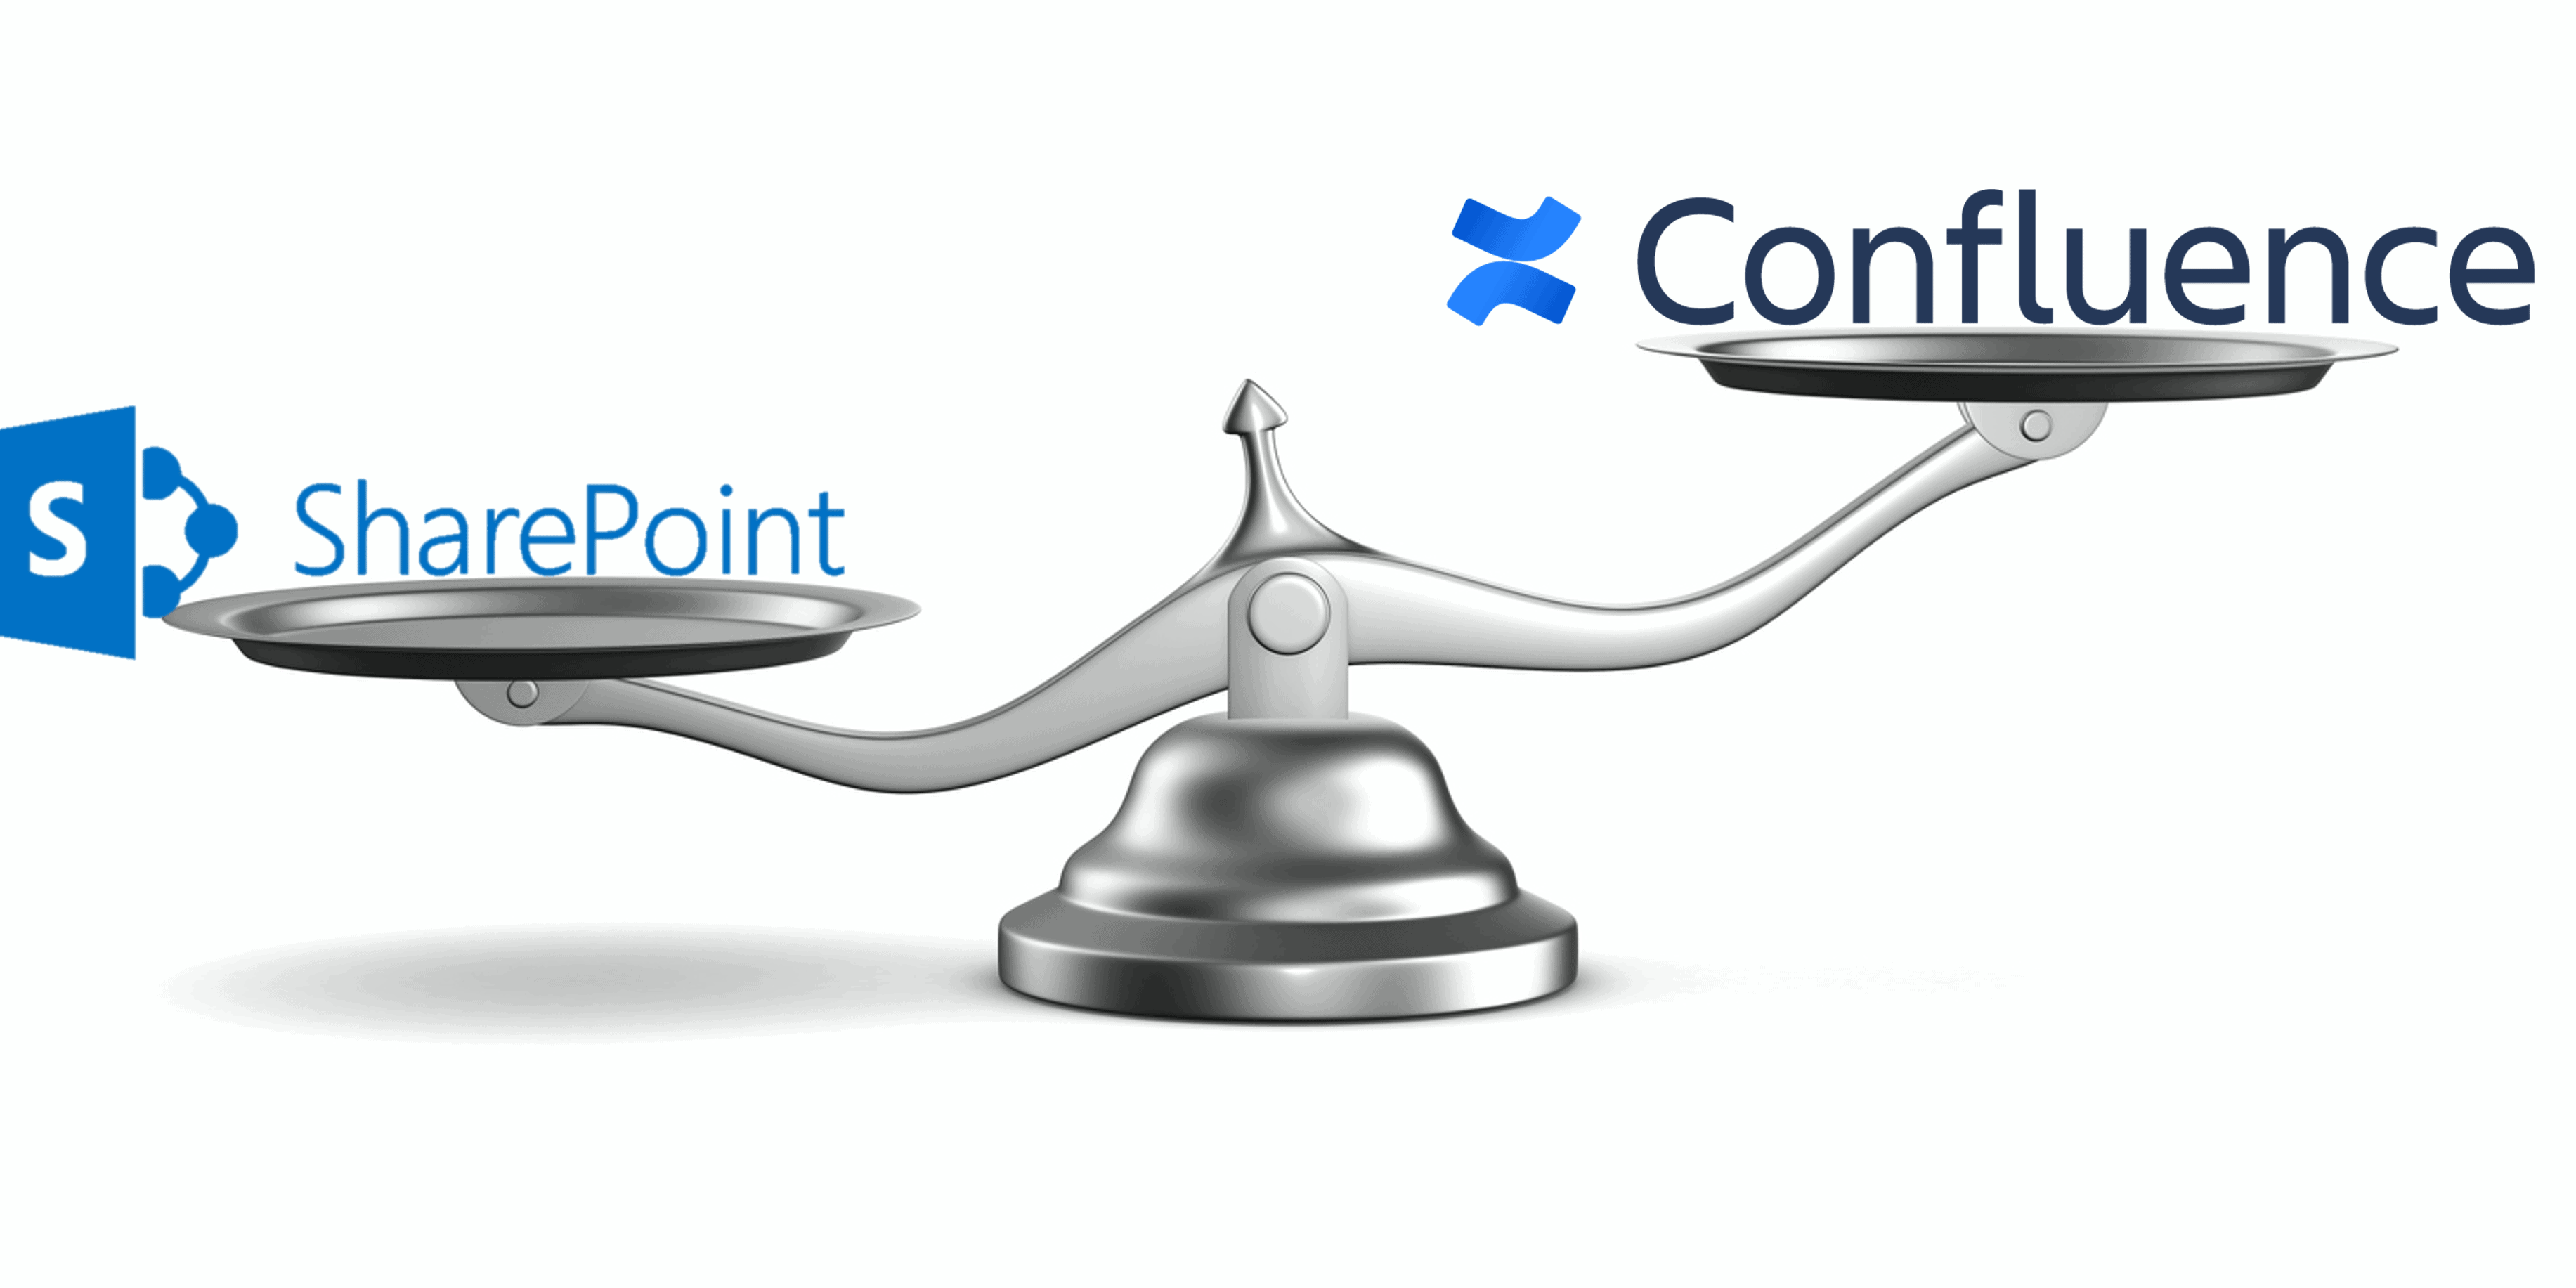 sharepoint vs confluence|What is the Difference Between Confluence and SharePoint?||sharepoint logo|confluence logo|confluence logo